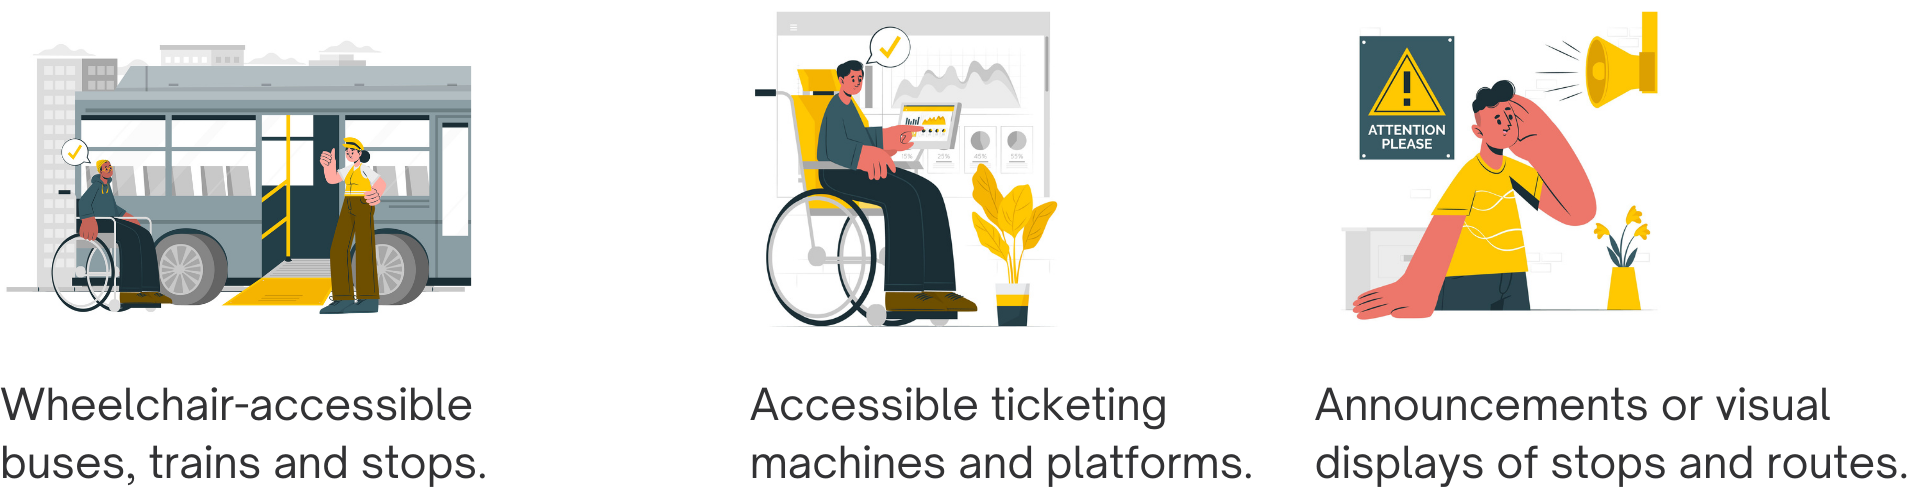 Accessible public transportation graphics (with captions)